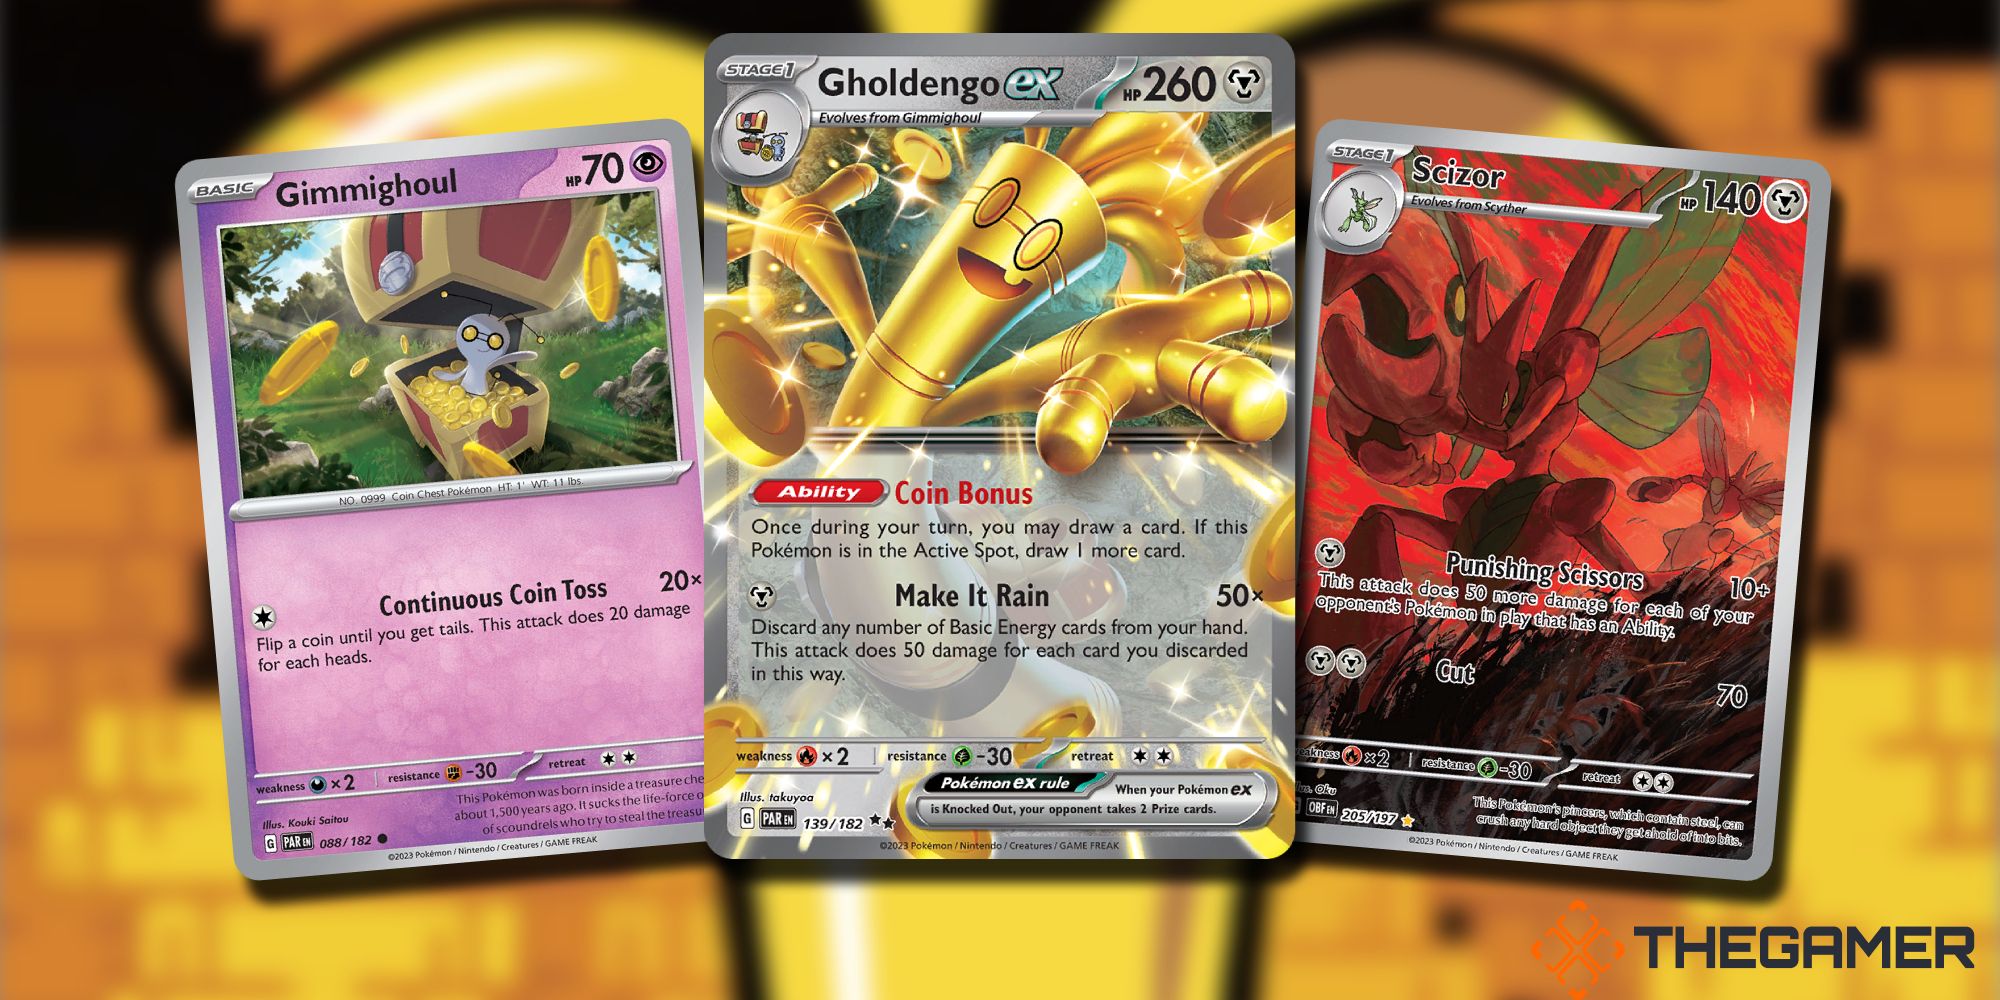 Pokemon TCG Gimmighoul, Gholdengo Ex, and Scizor Cards